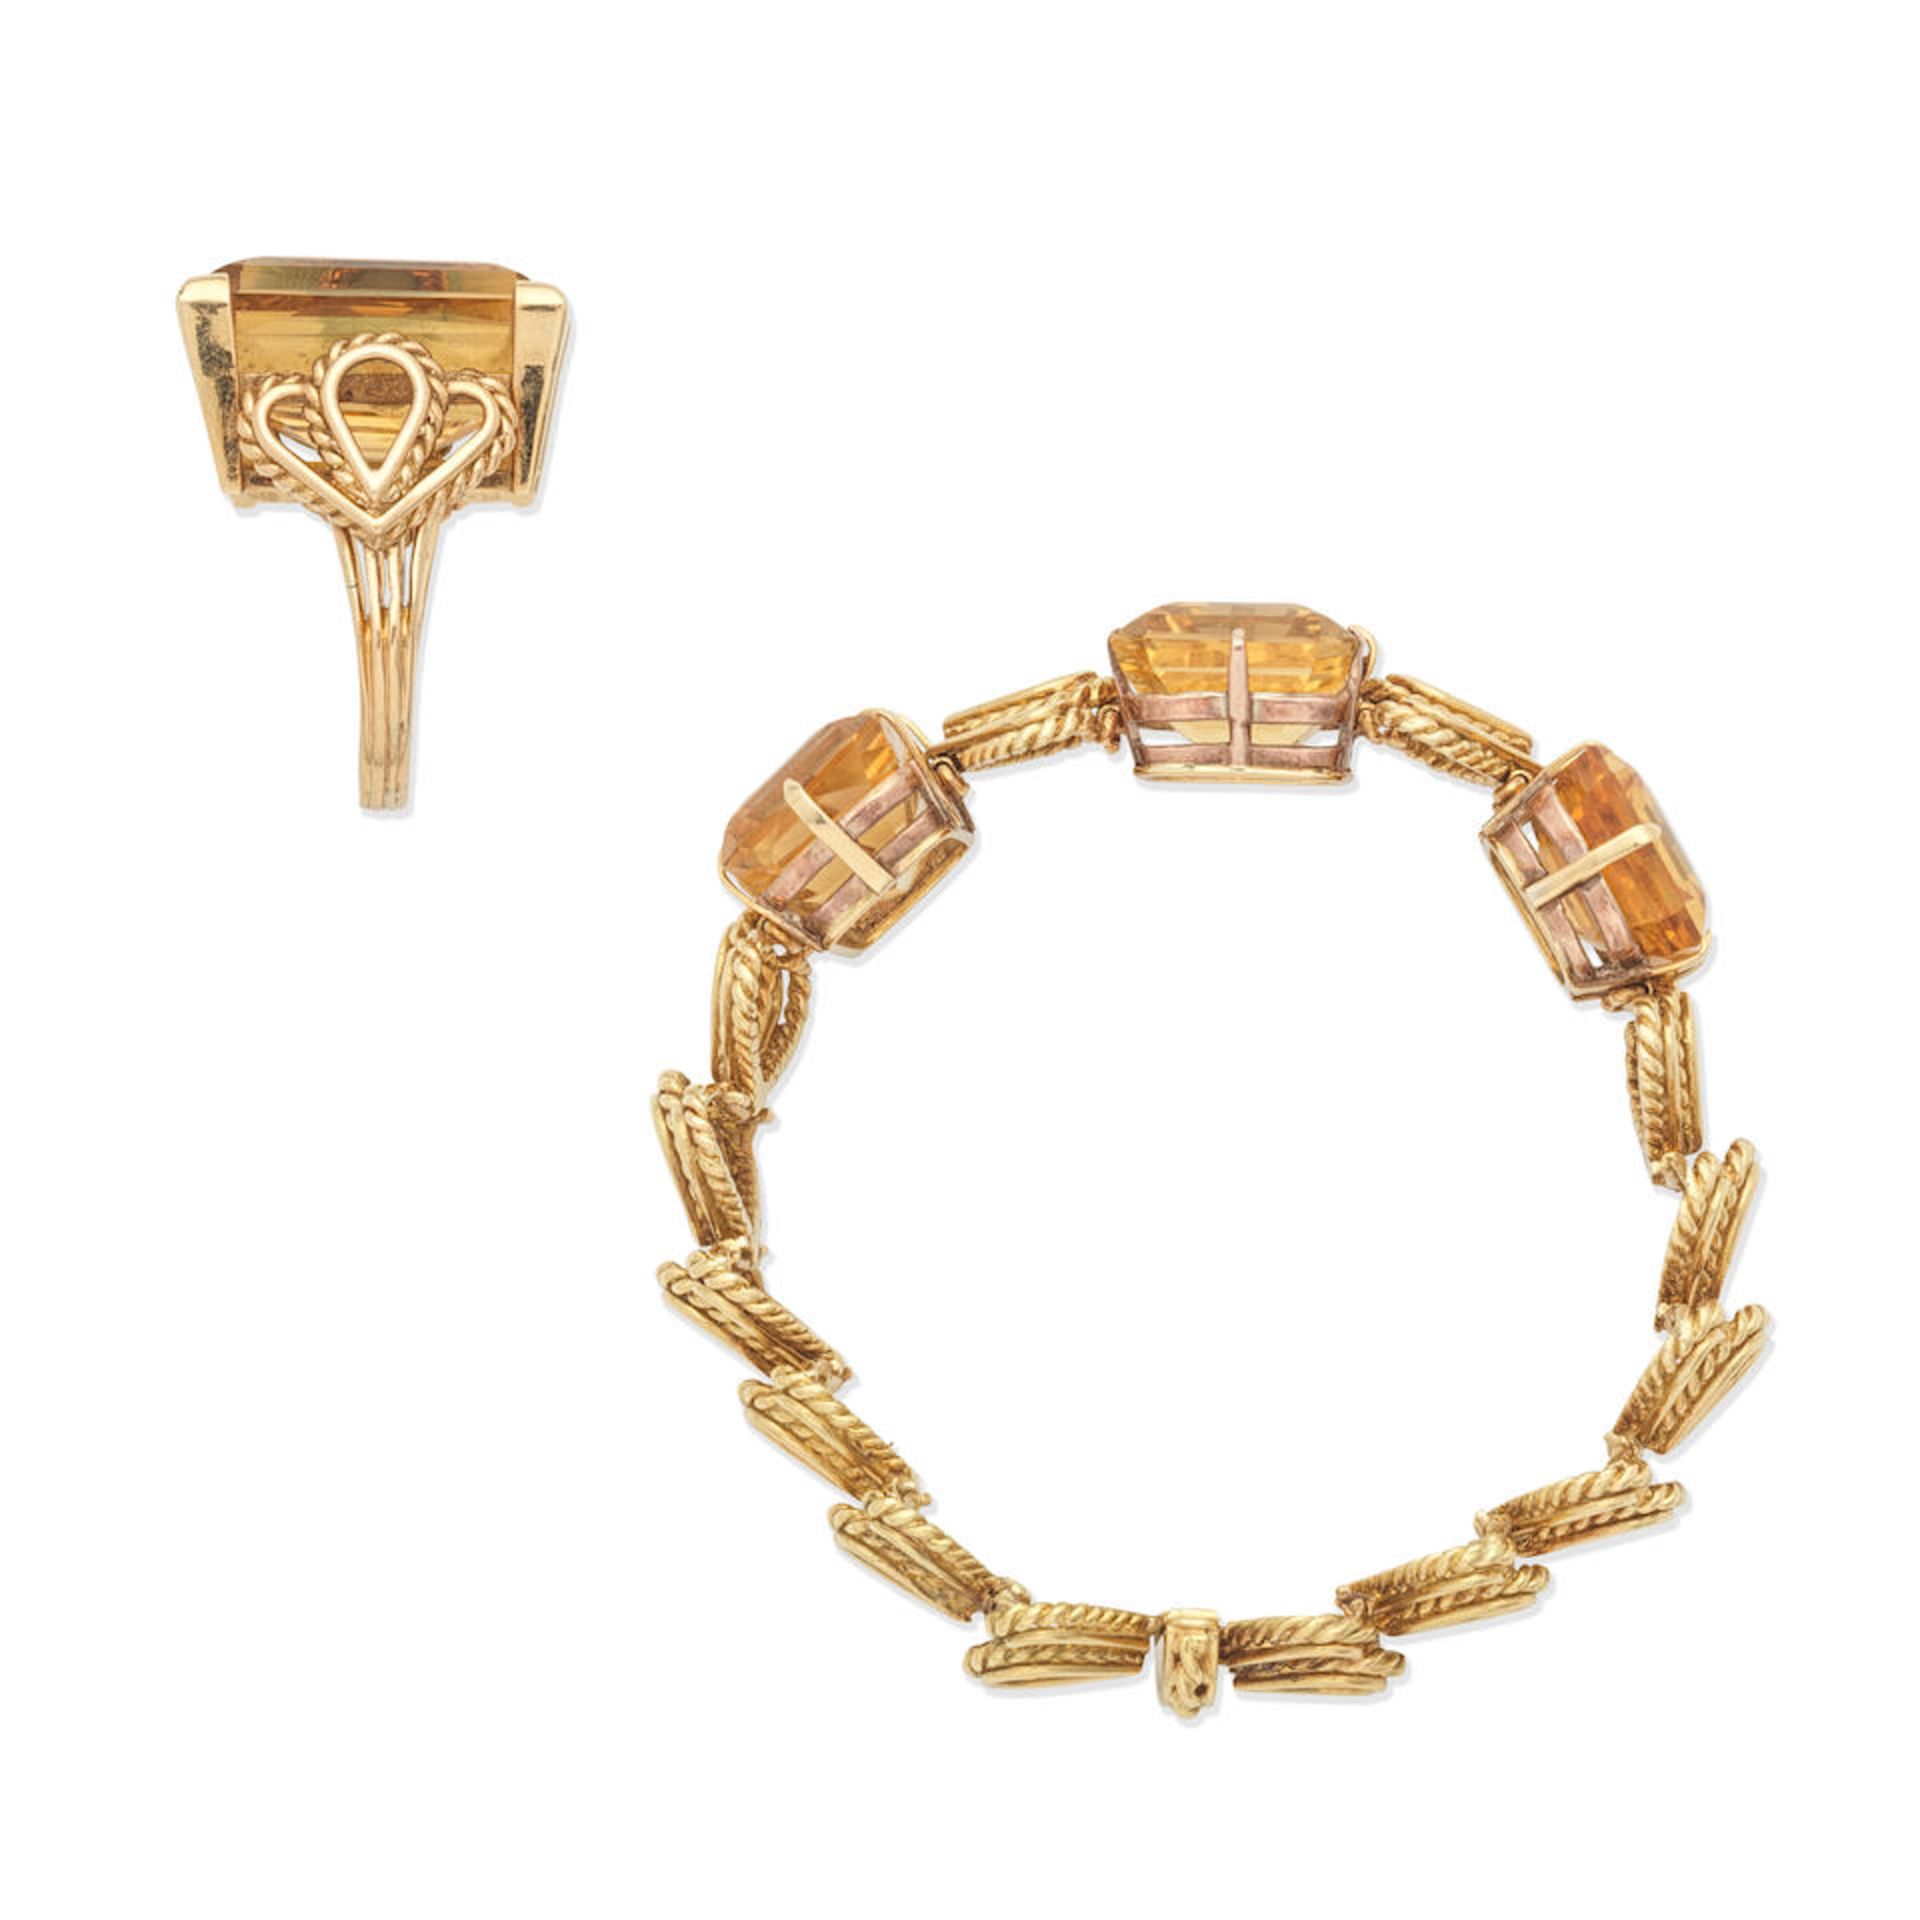 CITRINE RING BY HALLER JEWELLERY COMPANY AND A CITRINE BRACELET (2) - Image 2 of 3